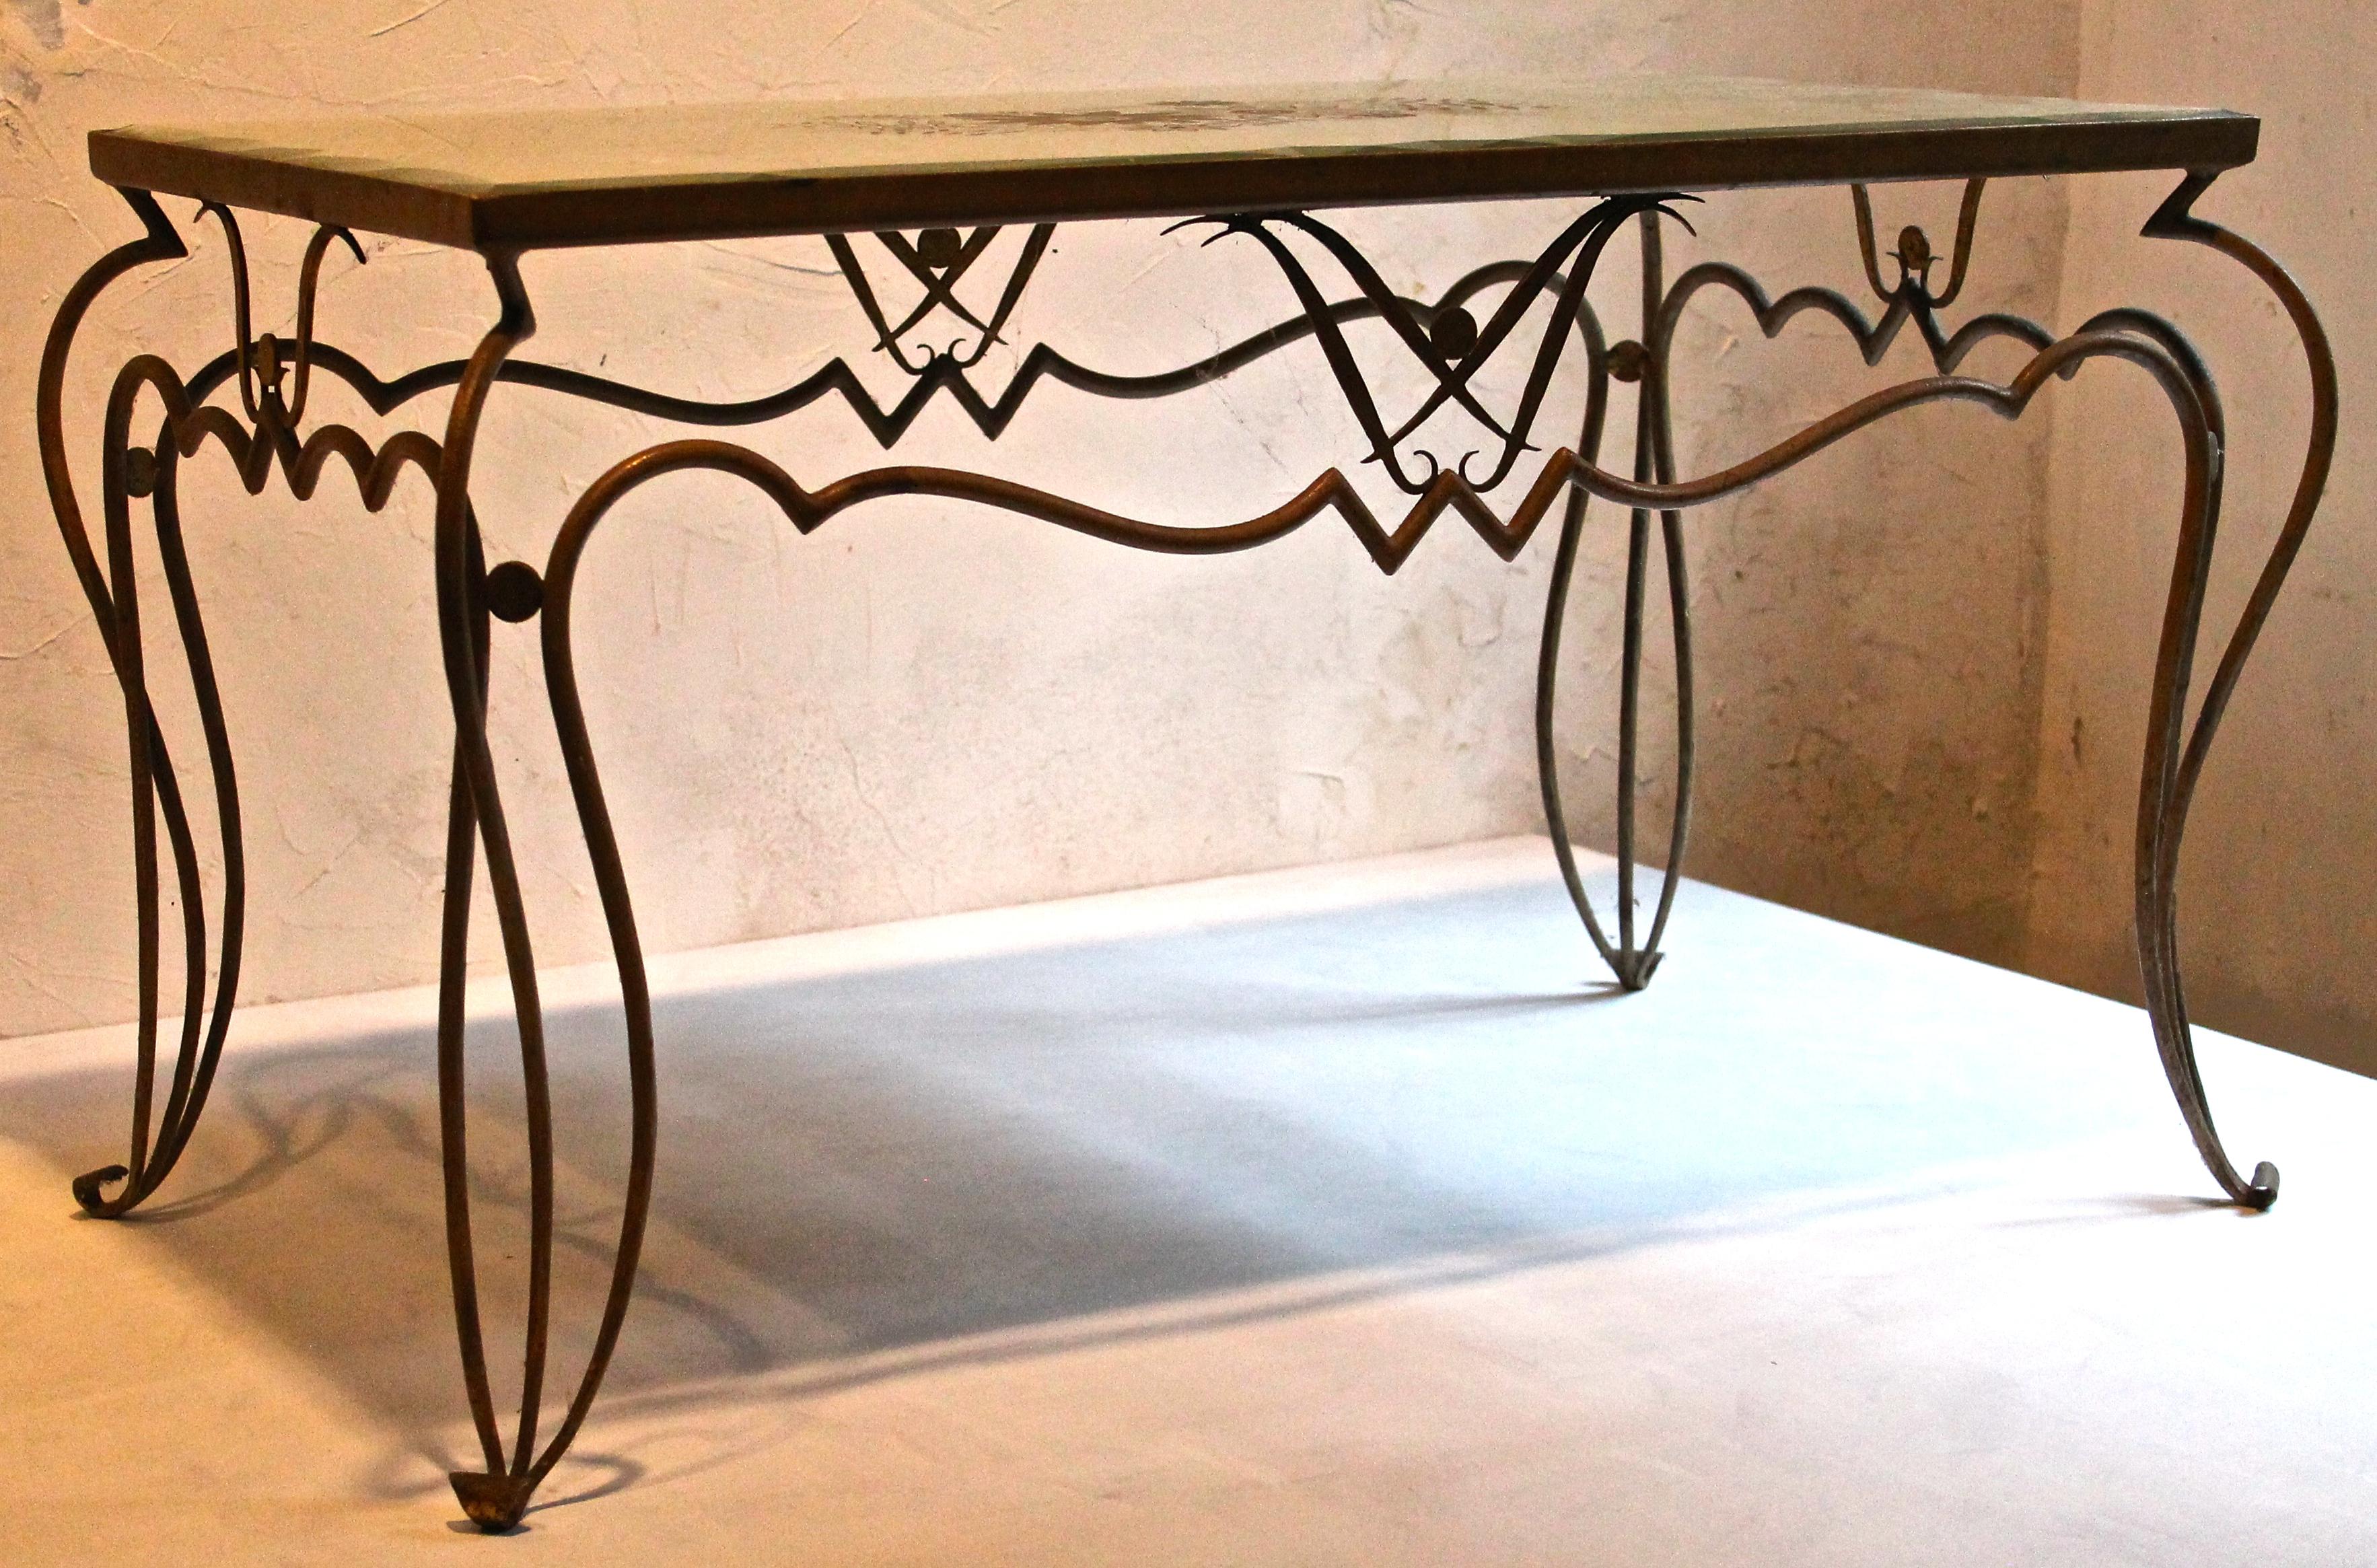 René Drouet French 1940s Coffee Table Wrought Iron and Églomisé Mirrored Top For Sale 6